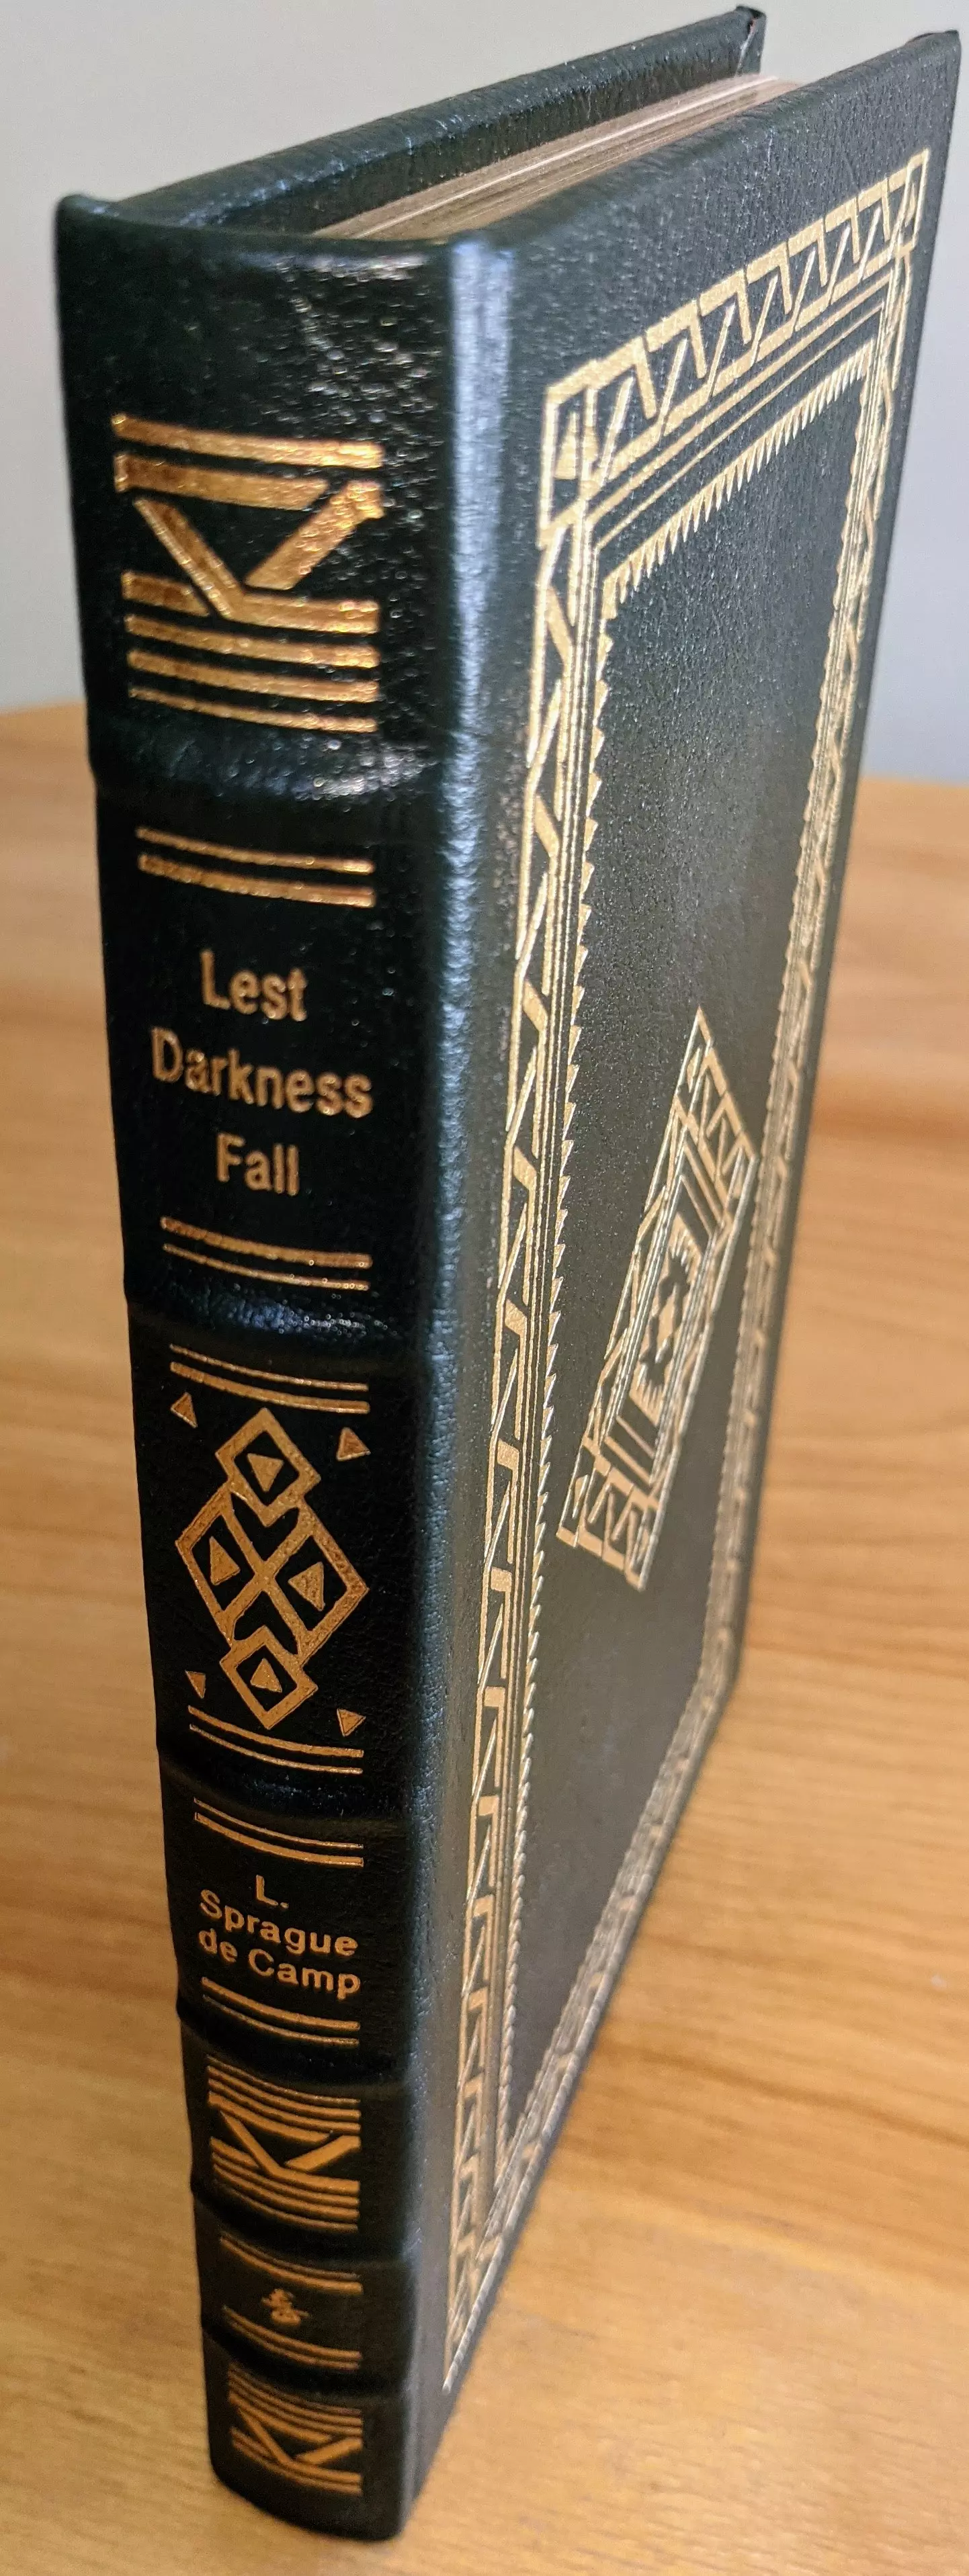 Stunning Dark Green Leather Bound hardback book with hubbed spine, cover artwork in 22kt gold, printed on archival paper with gold gilded edges, smyth sewing & concealed muslin joints
	  - original artwork by Pat Morrissey